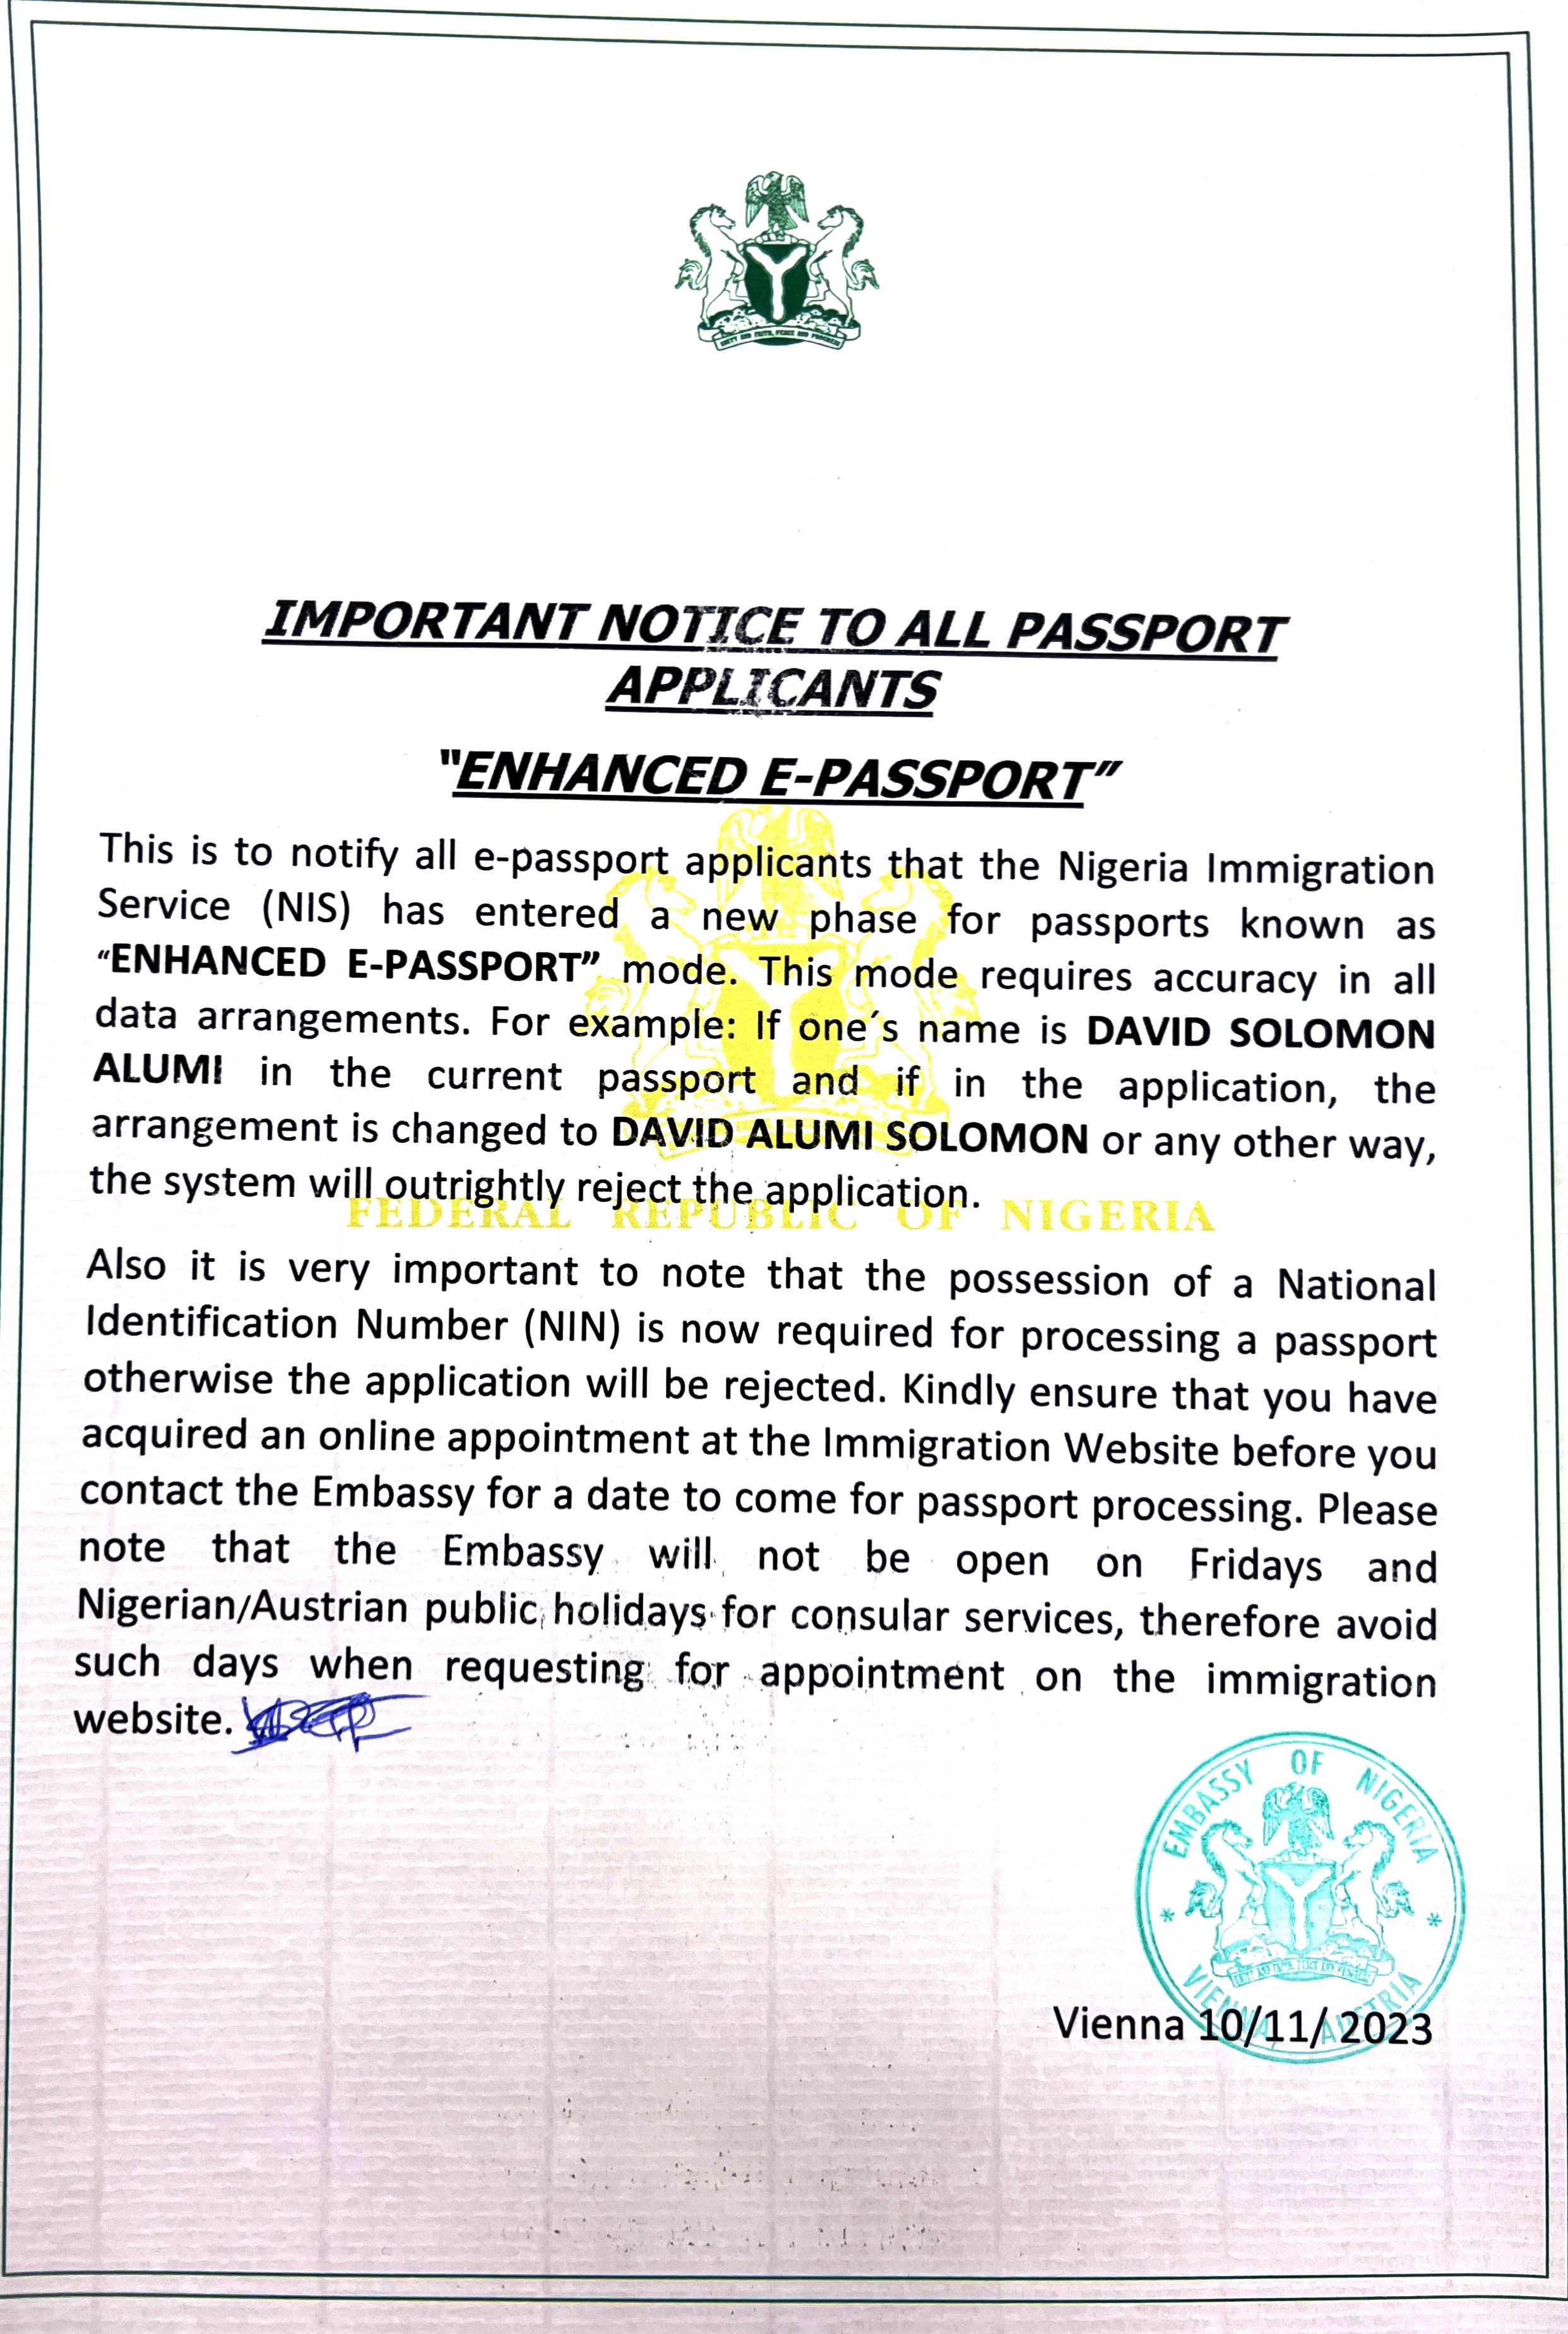 IMPORTANT INFORMATION FOR PASSPORT APPLICANTS